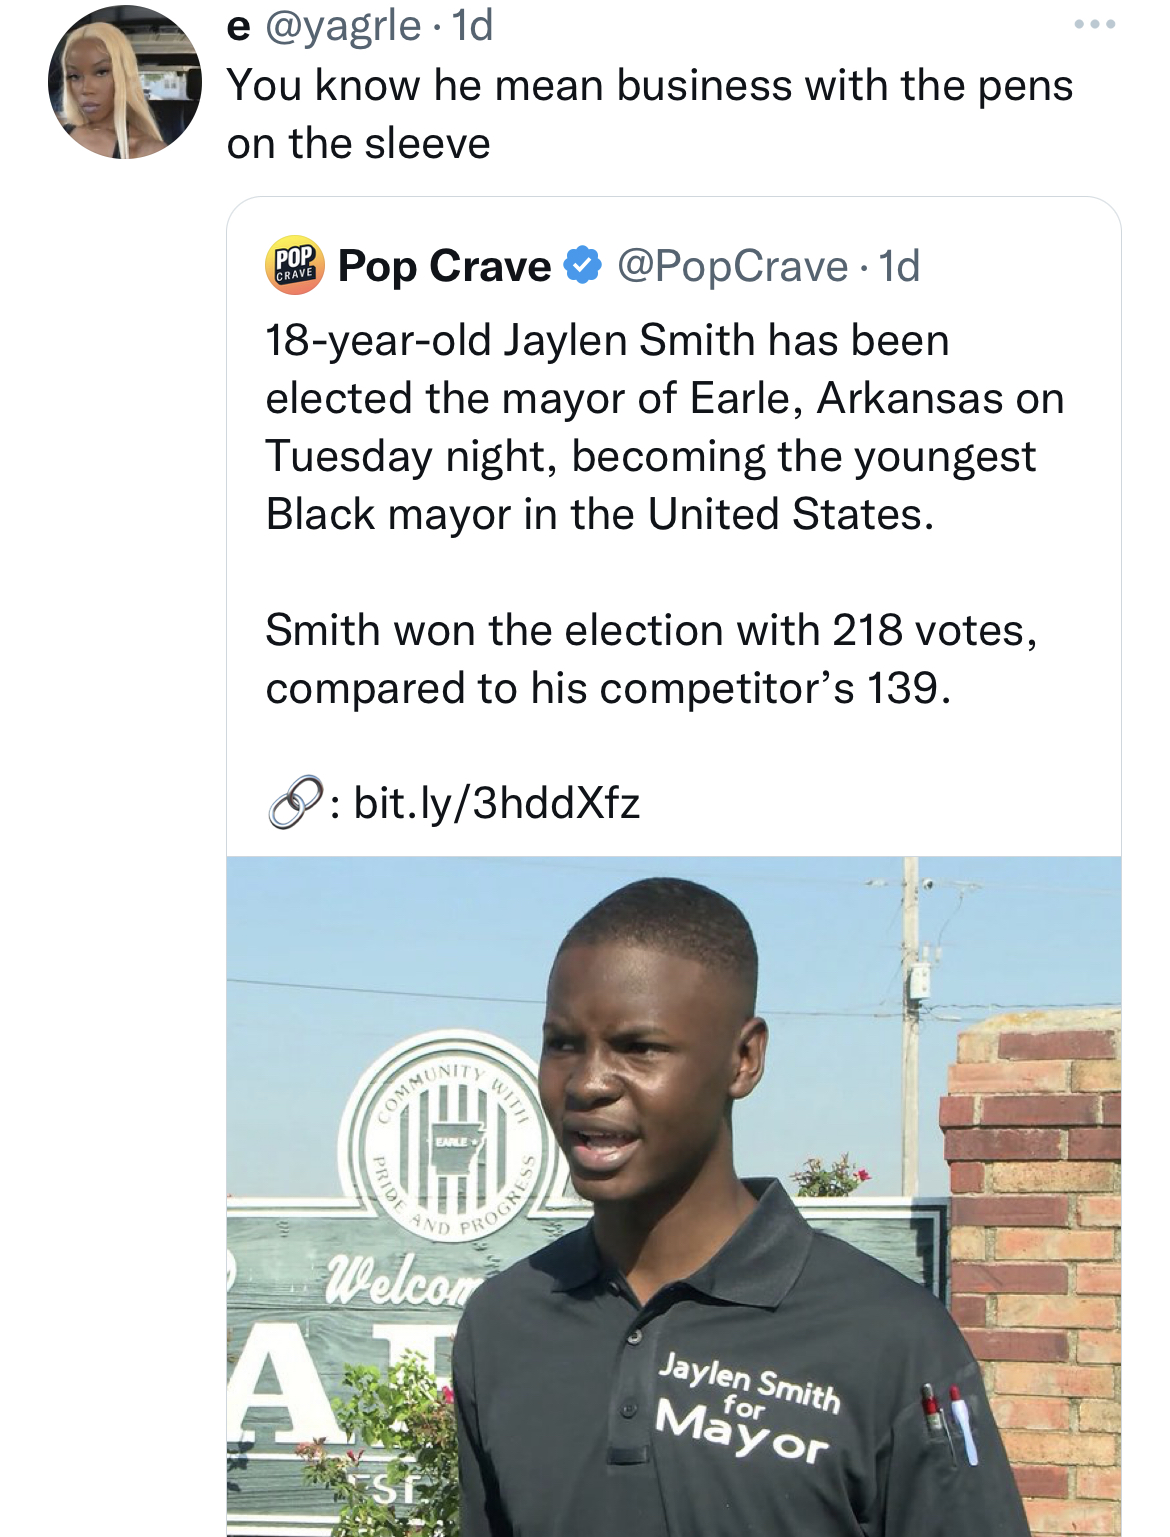 Tweets dunking on celebs - media - .1d You know he mean business with the pens on the sleeve Pop Crave .1d 18yearold Jaylen Smith has been elected the mayor of Earle, Arkansas on Tuesday night, becoming the youngest Black mayor in the United States. Smith